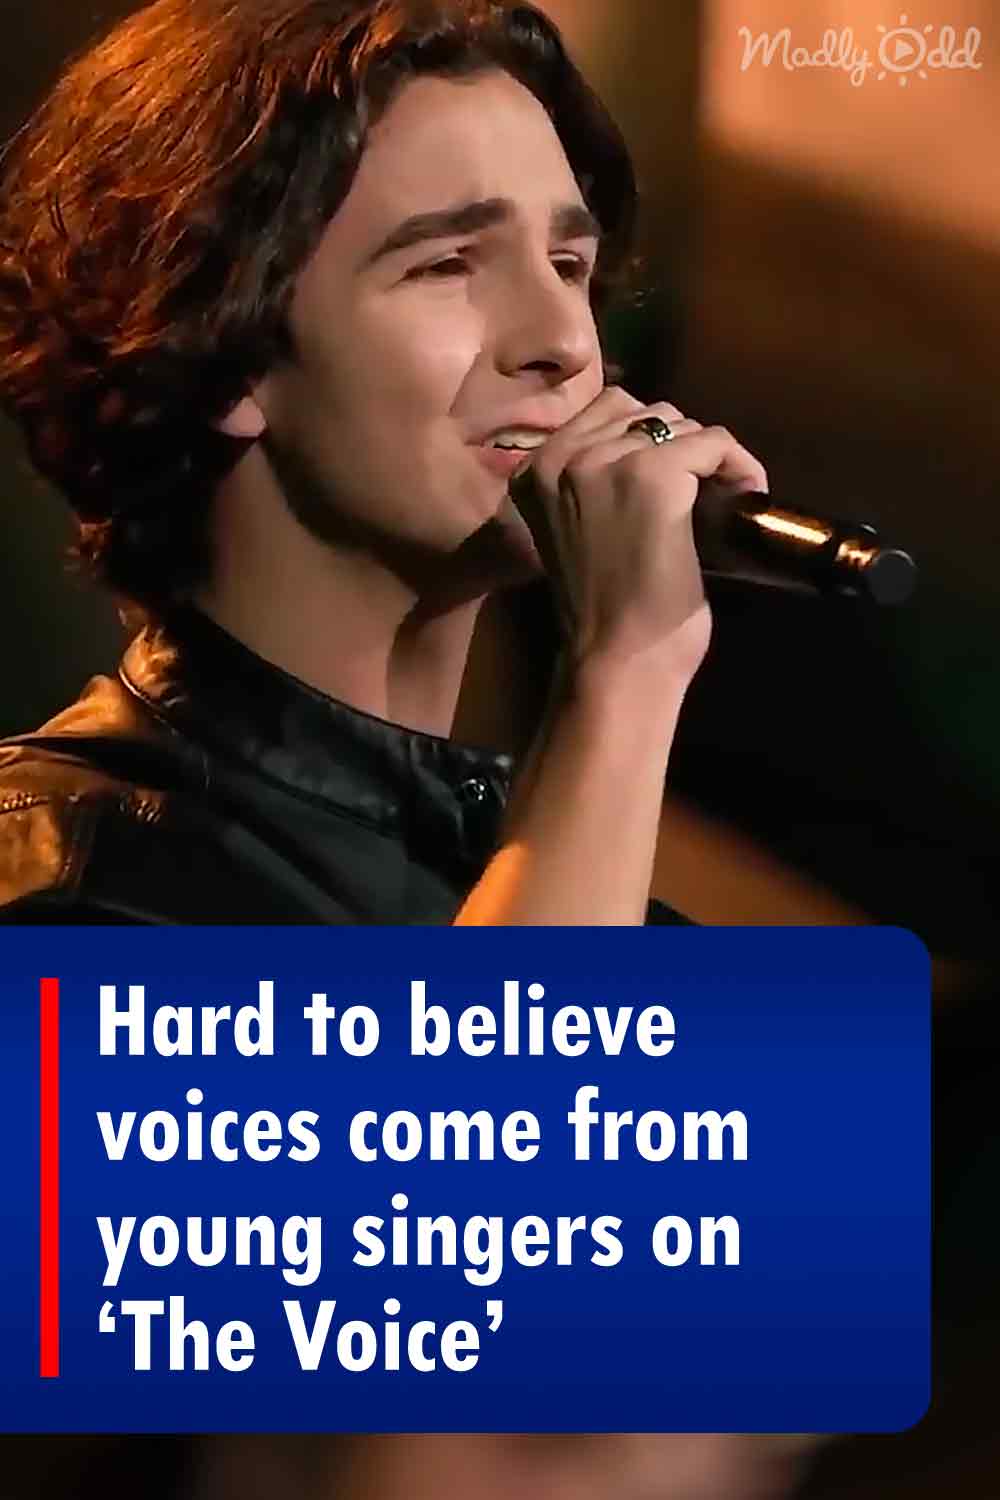 Hard to believe voices come from young singers on ‘The Voice’